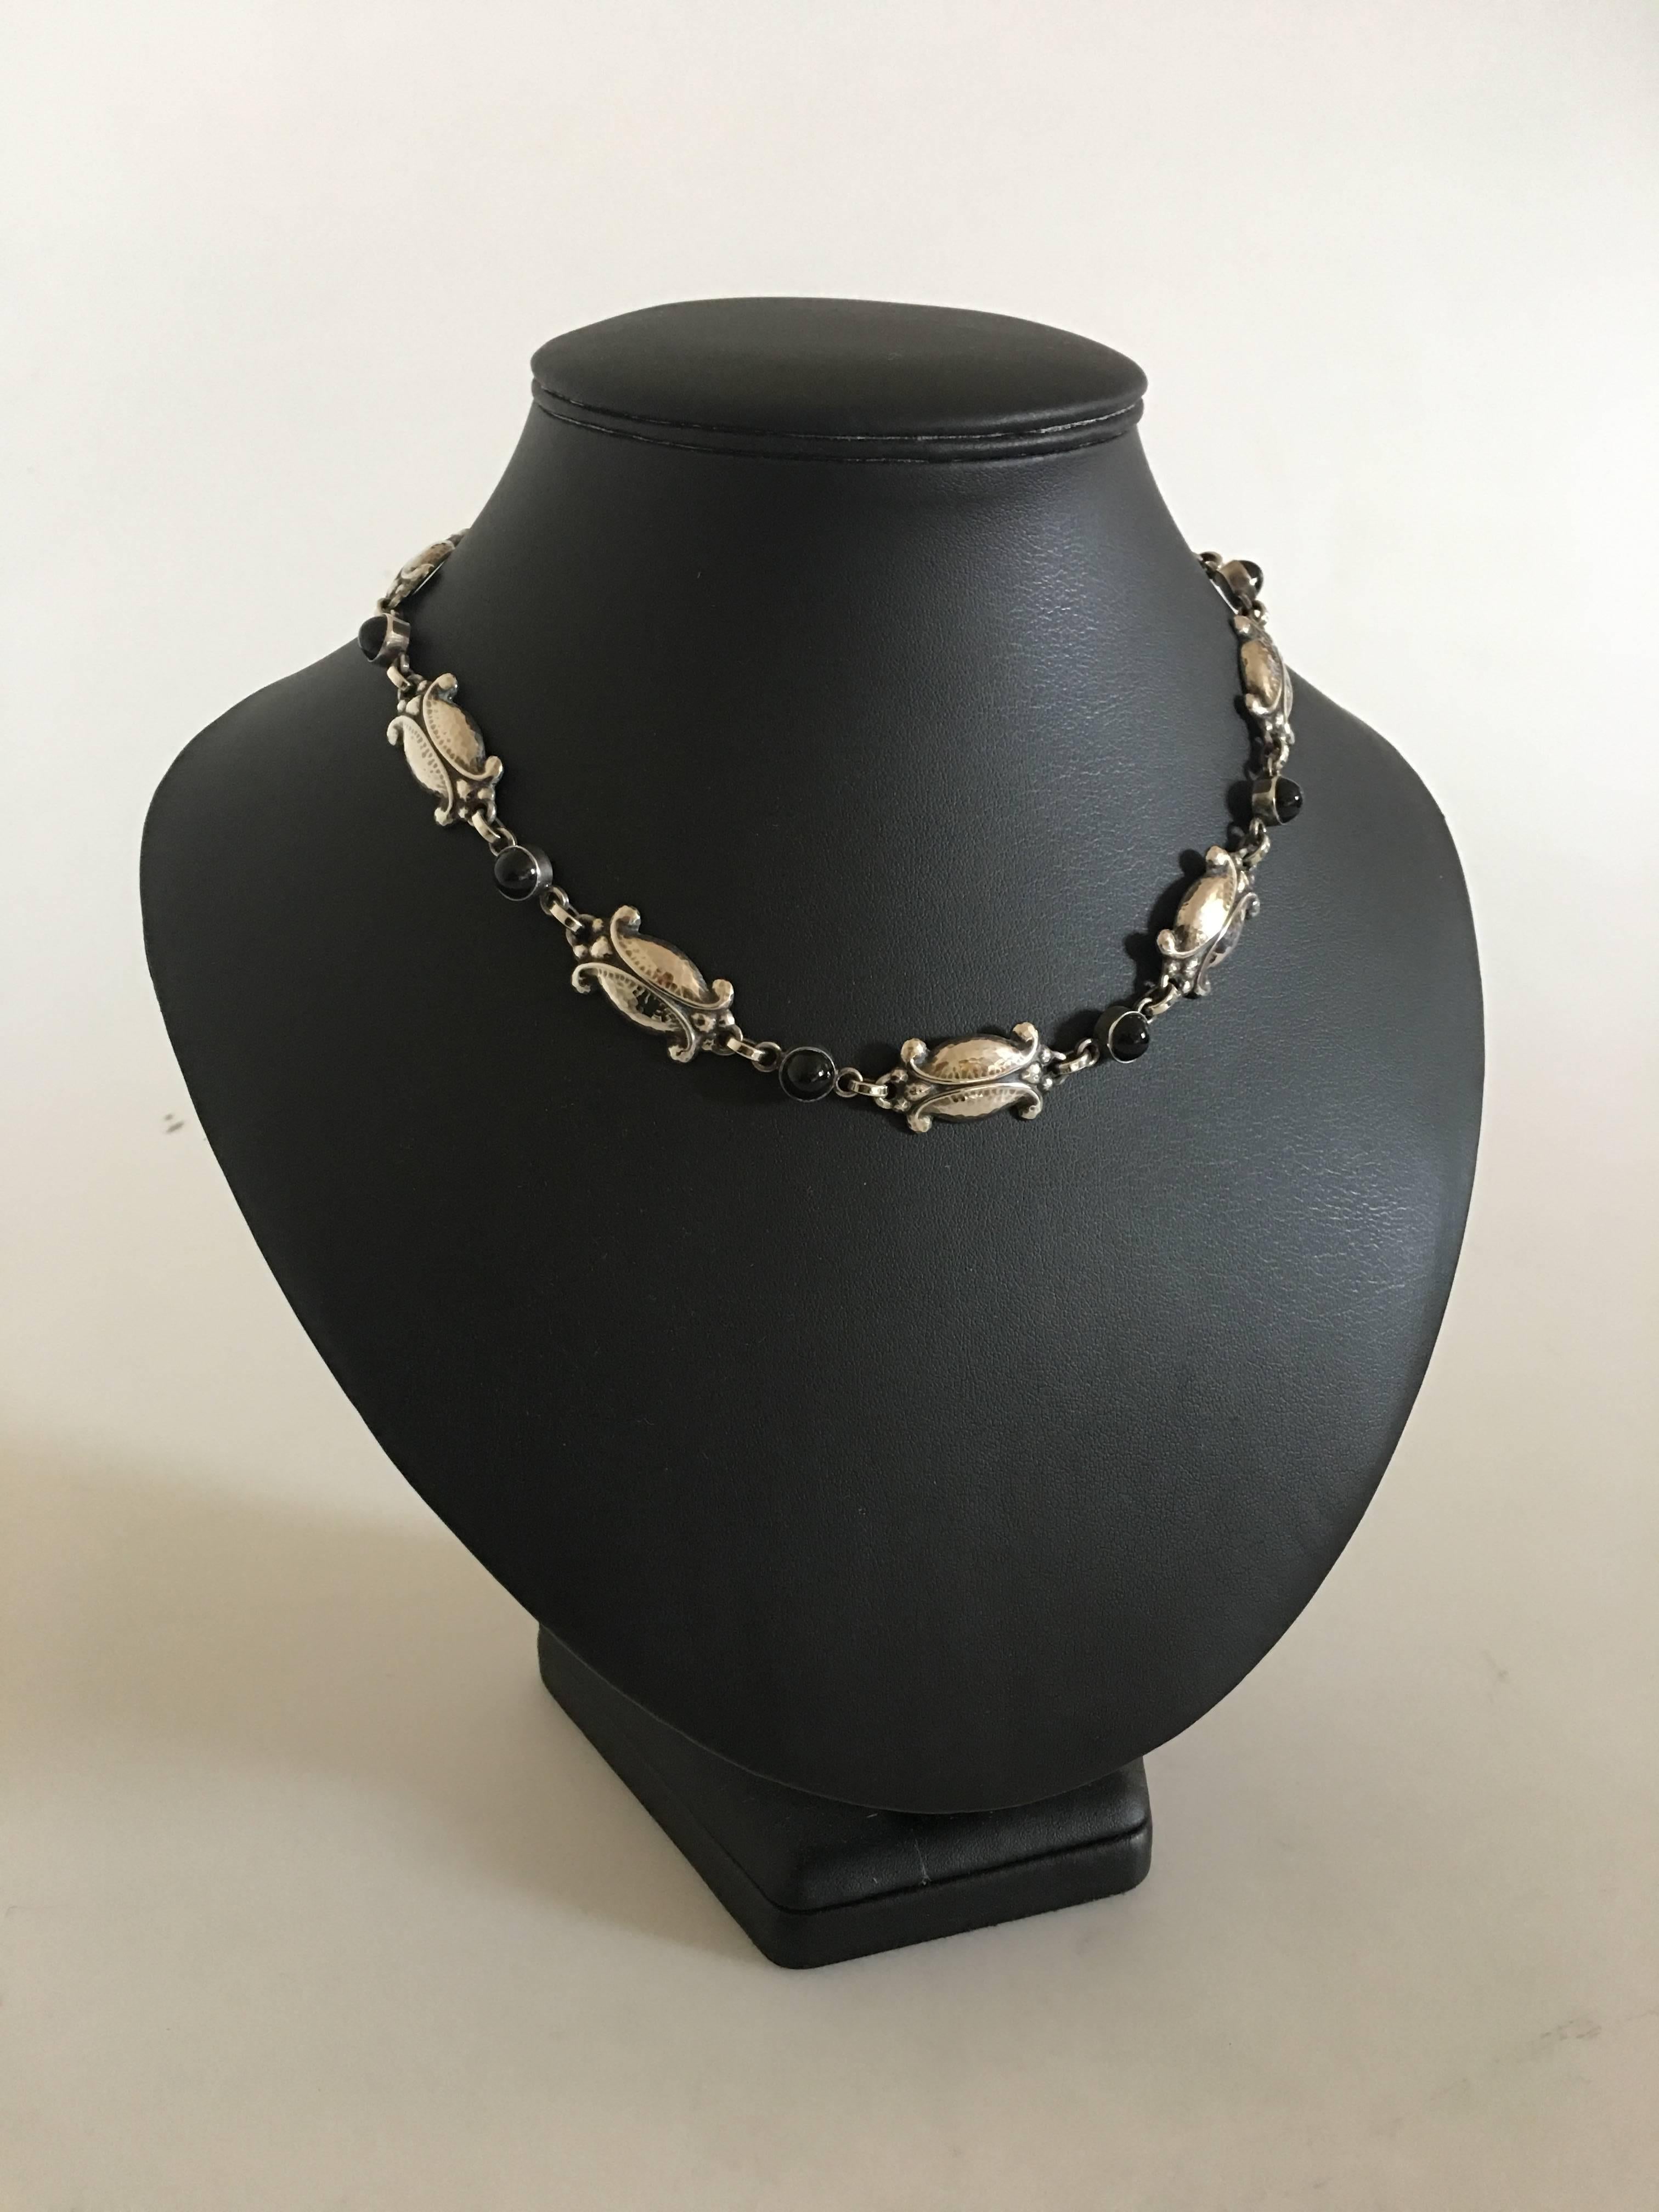 Georg Jensen Sterling Silver Necklace No. 15 with Black Onyx. Measures 42 cm L. Weighs 40 grams. Manufactured after 1945.